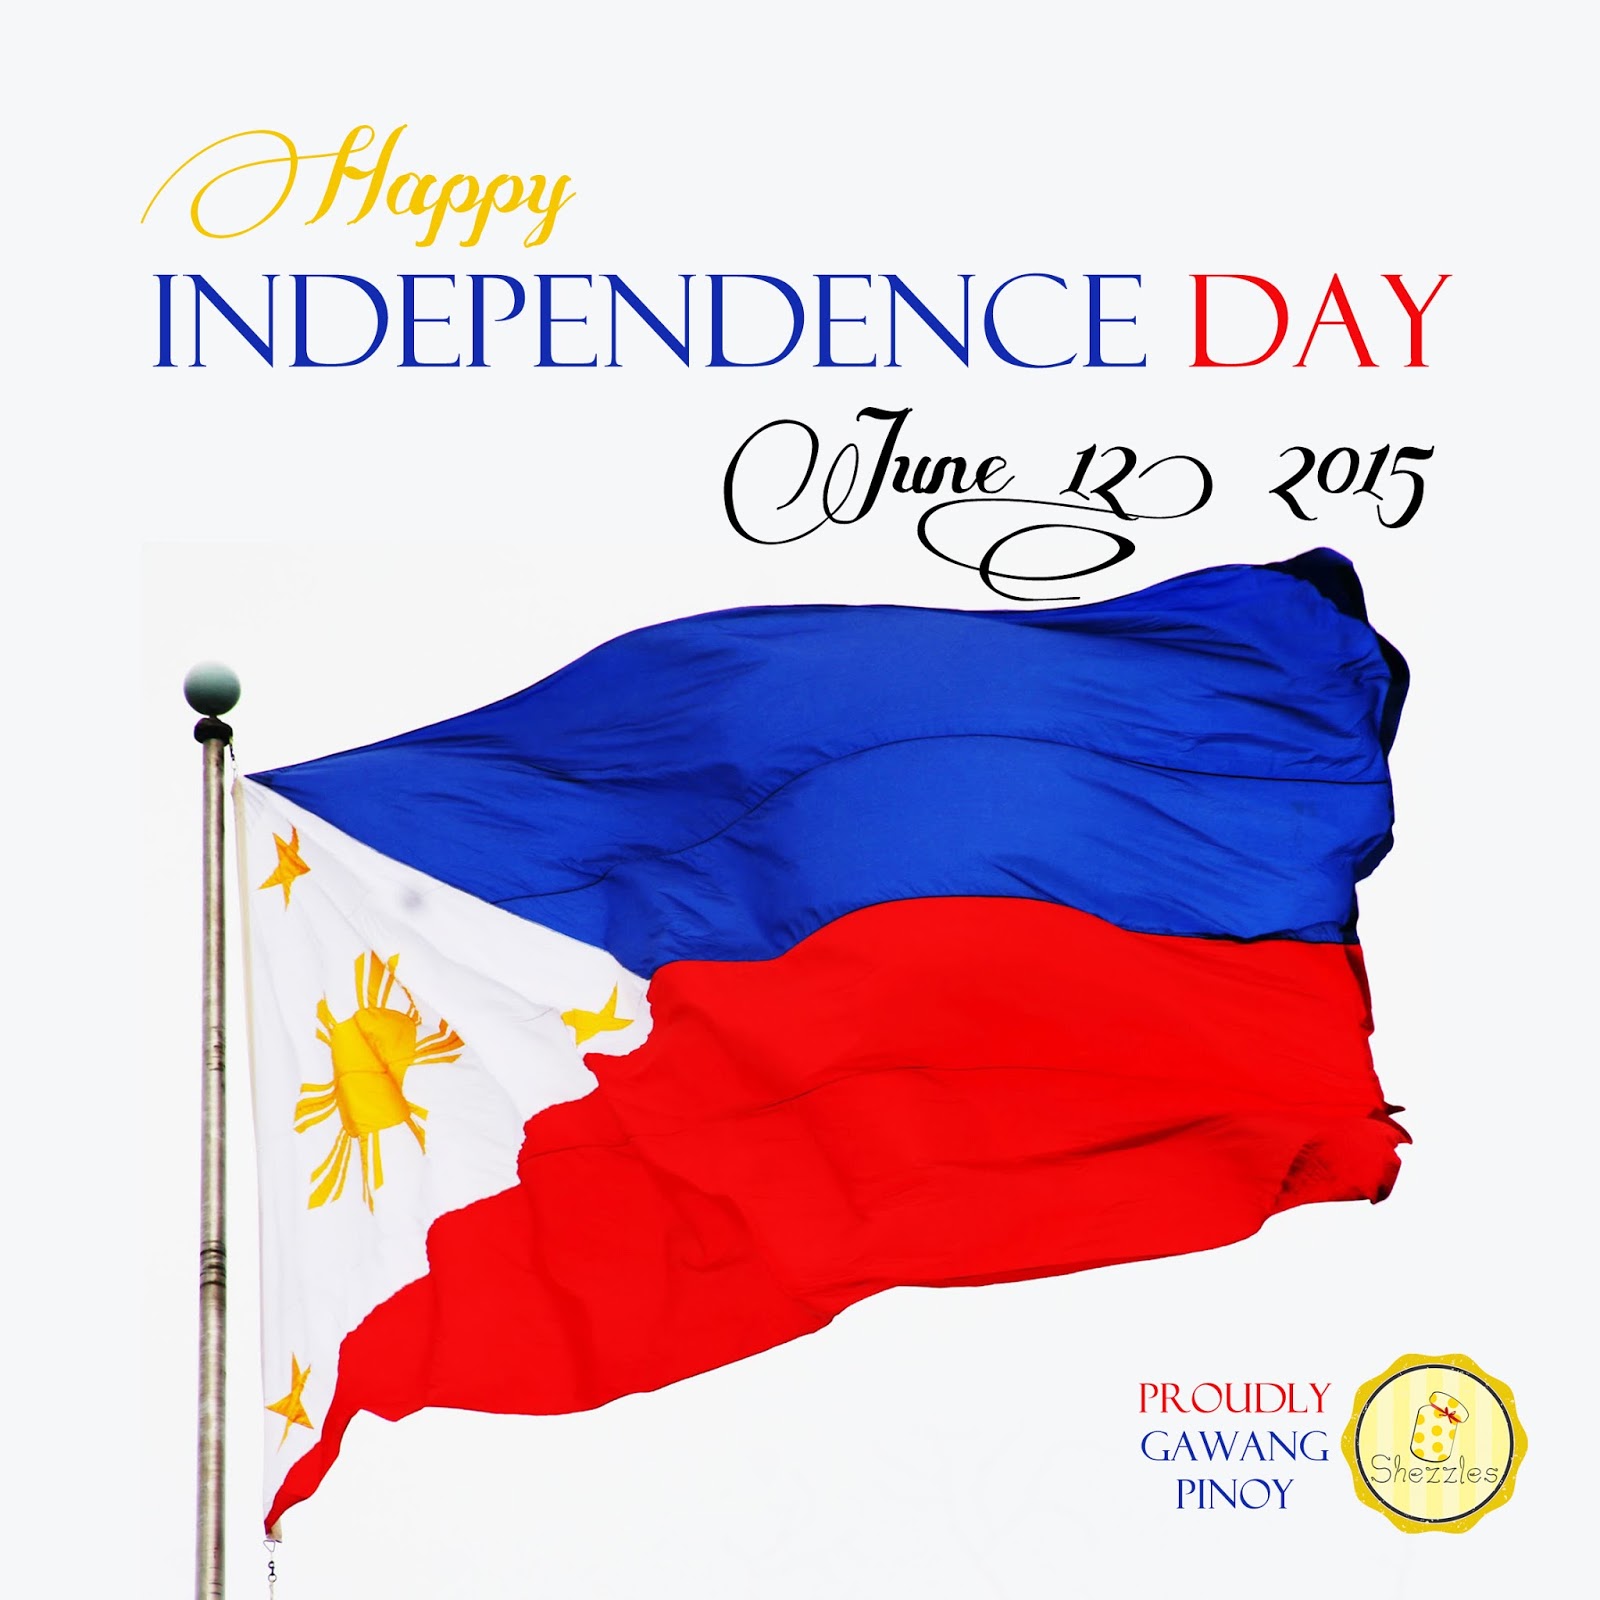 Shezzles Cakes And Pastries Happy Independence Day Philippines